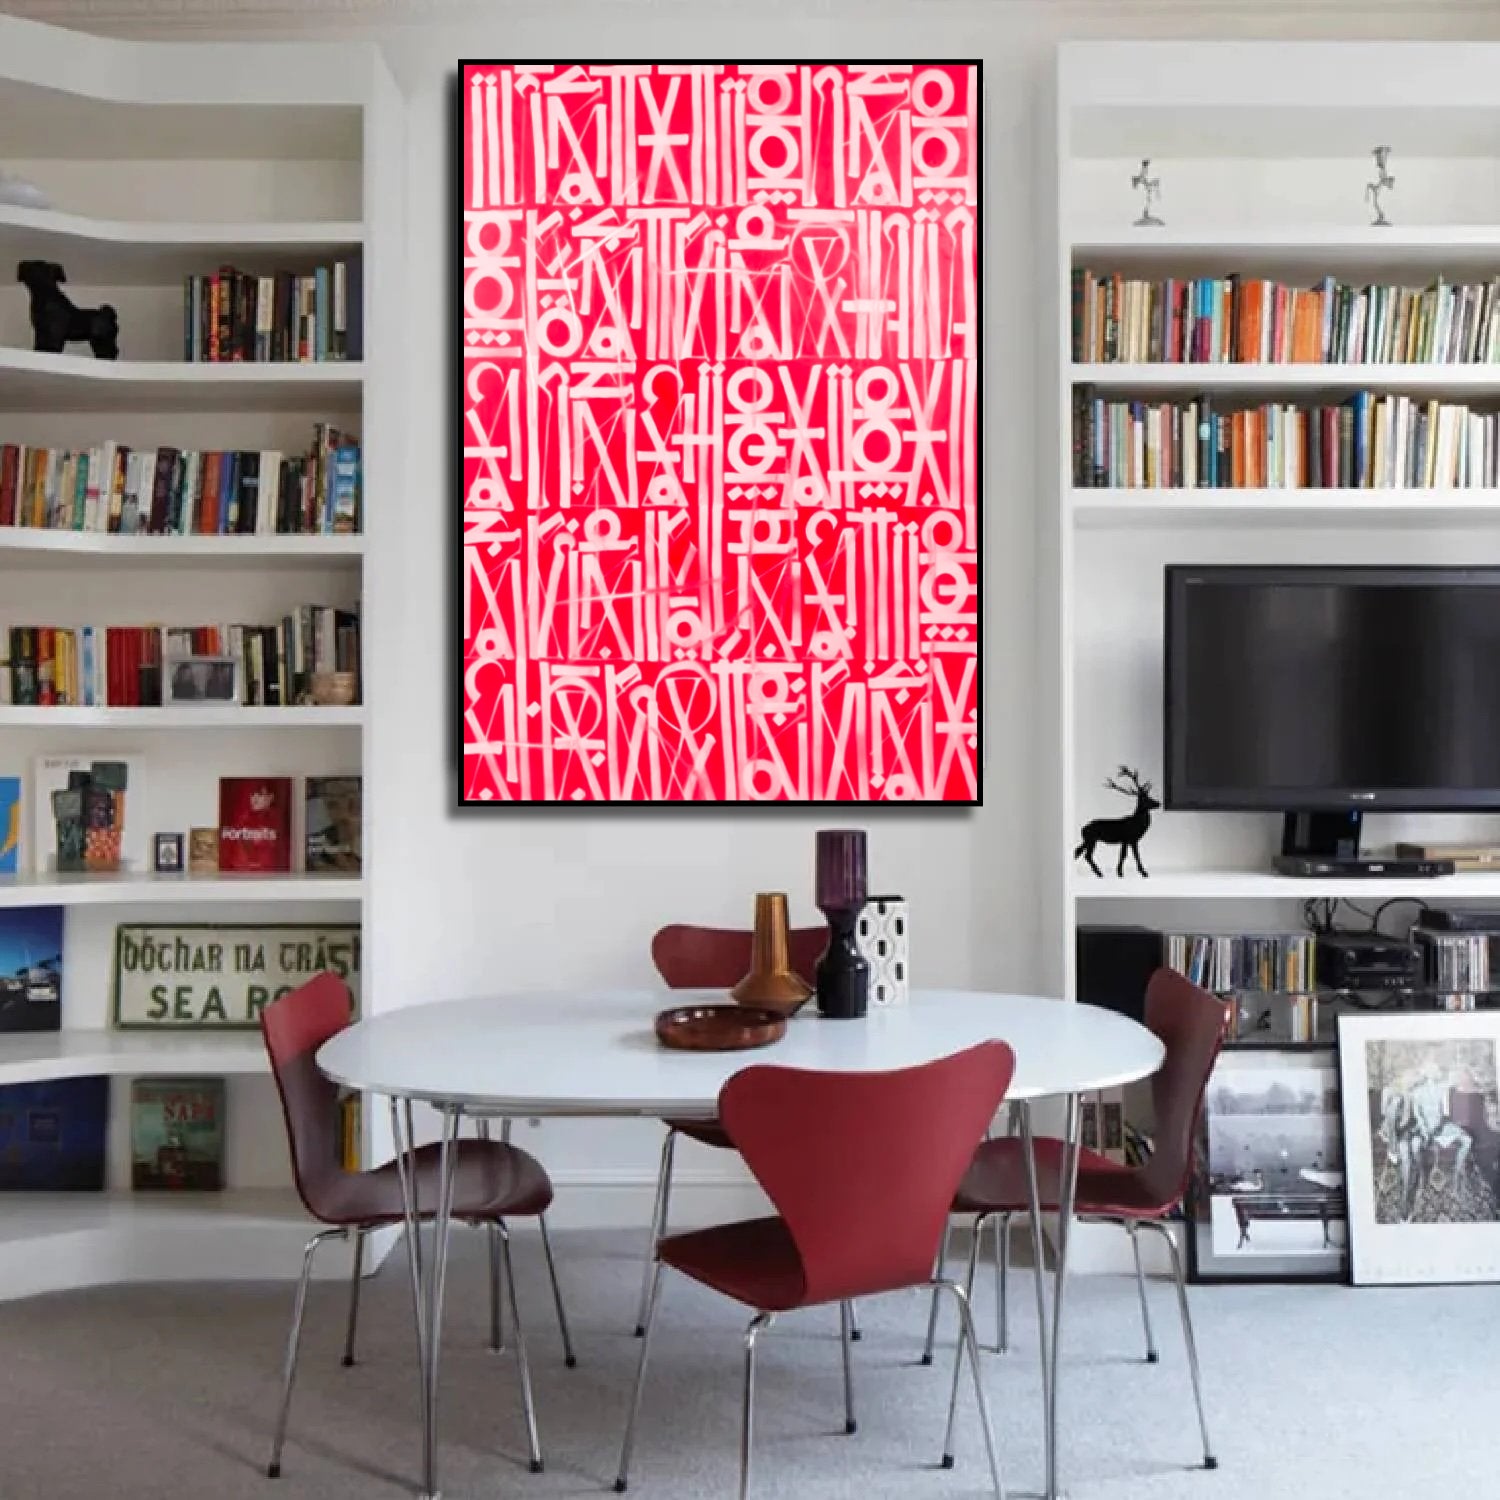 Modern Red Retna Reproduction Calligraphic Wall Art